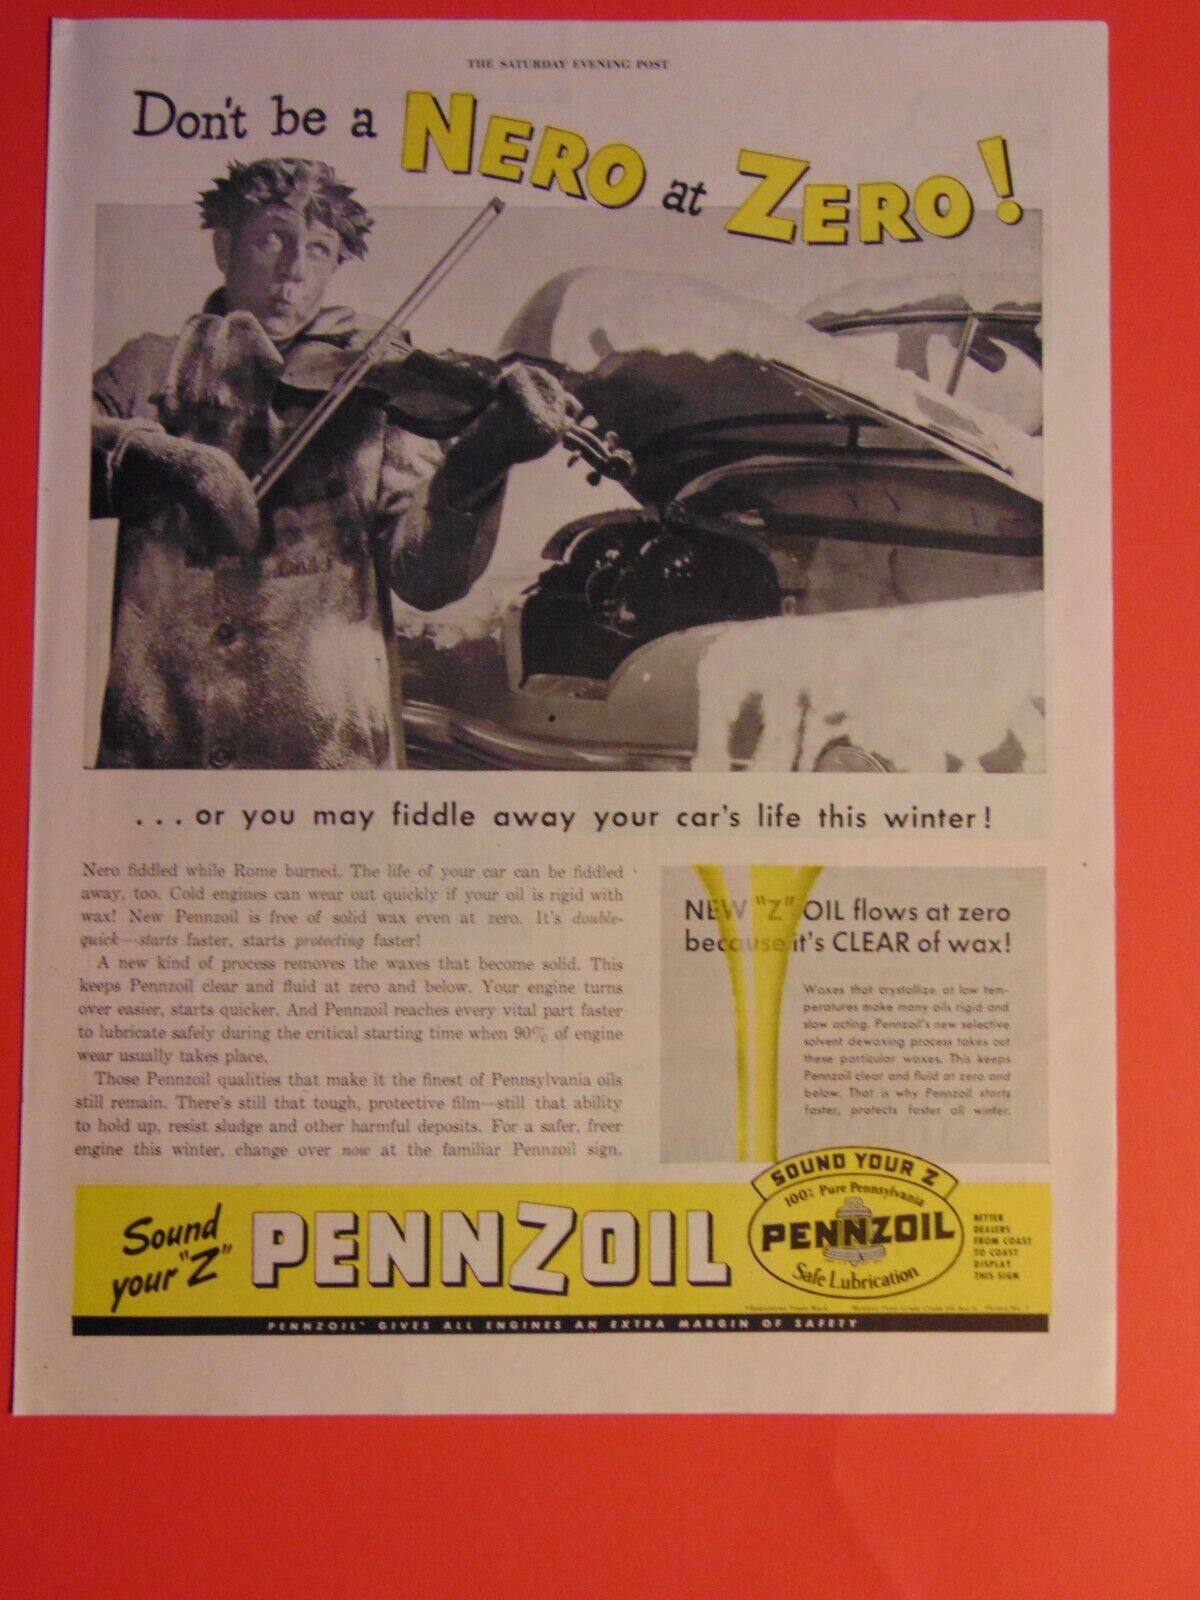 1946 PENNZOIL Don\'t Be A NERO at ZERO Don\'t Fiddle with Oil photo art print ad